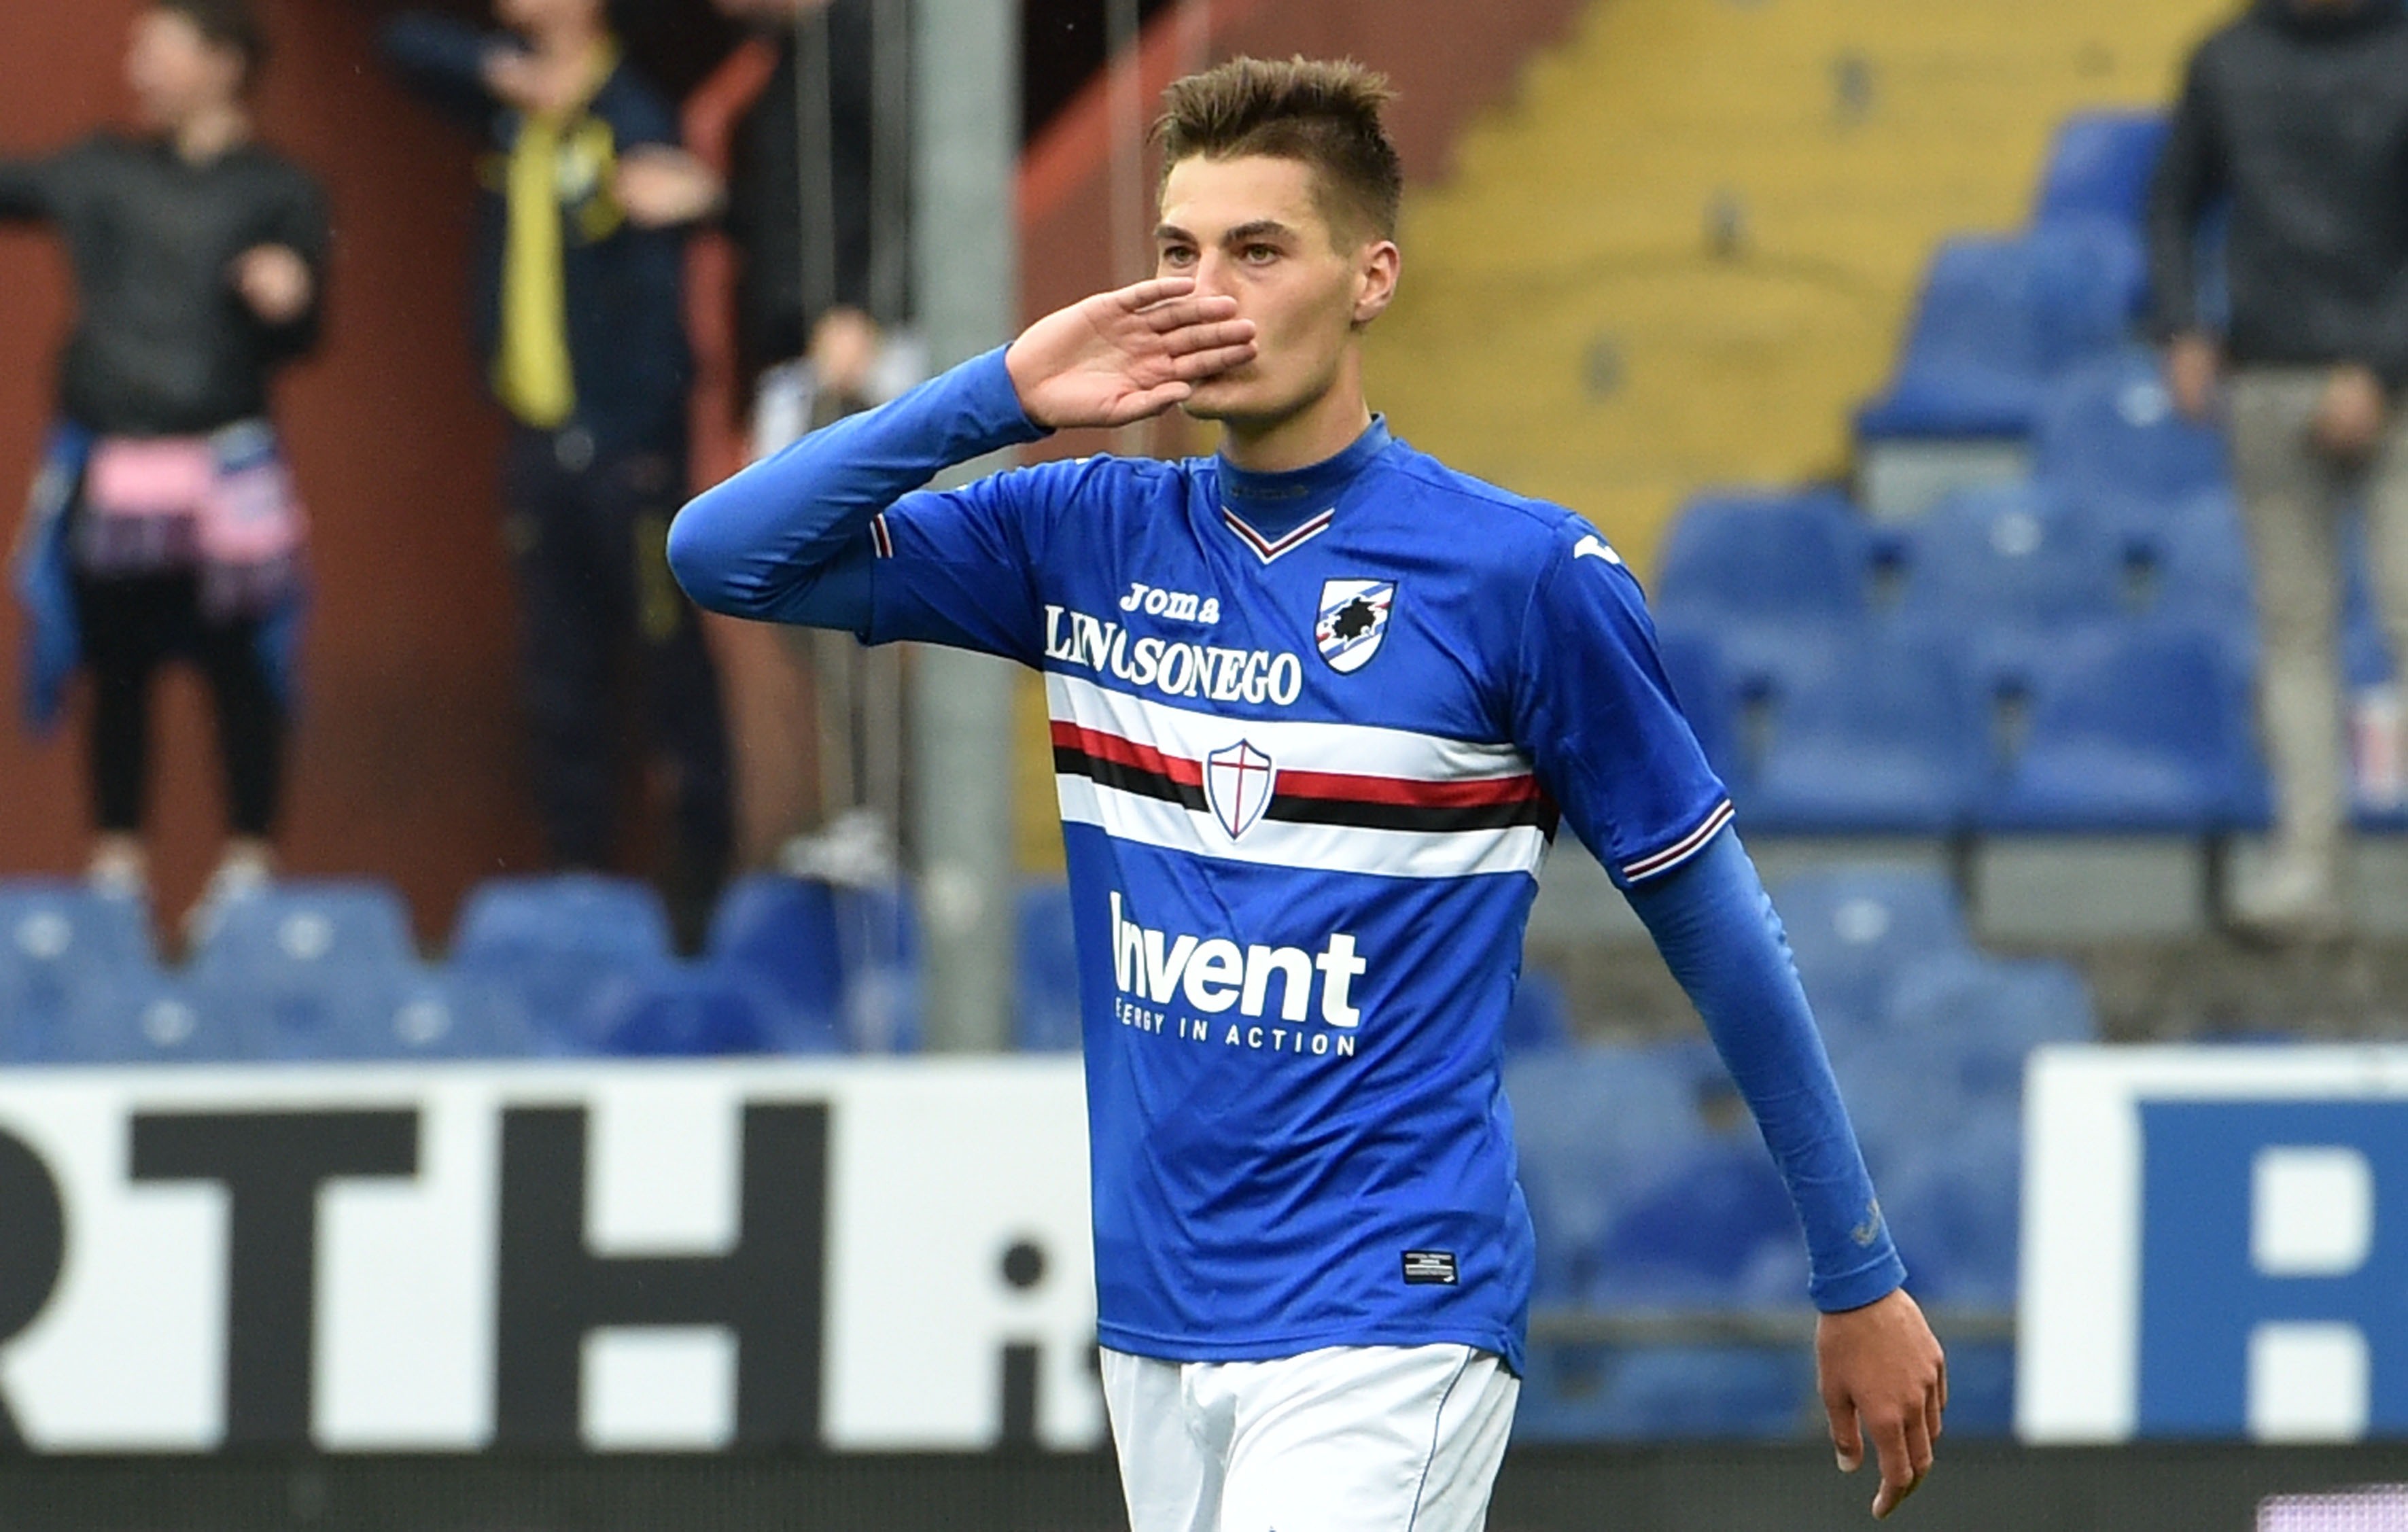 Schick’s agent: “Three teams in race to sign him”